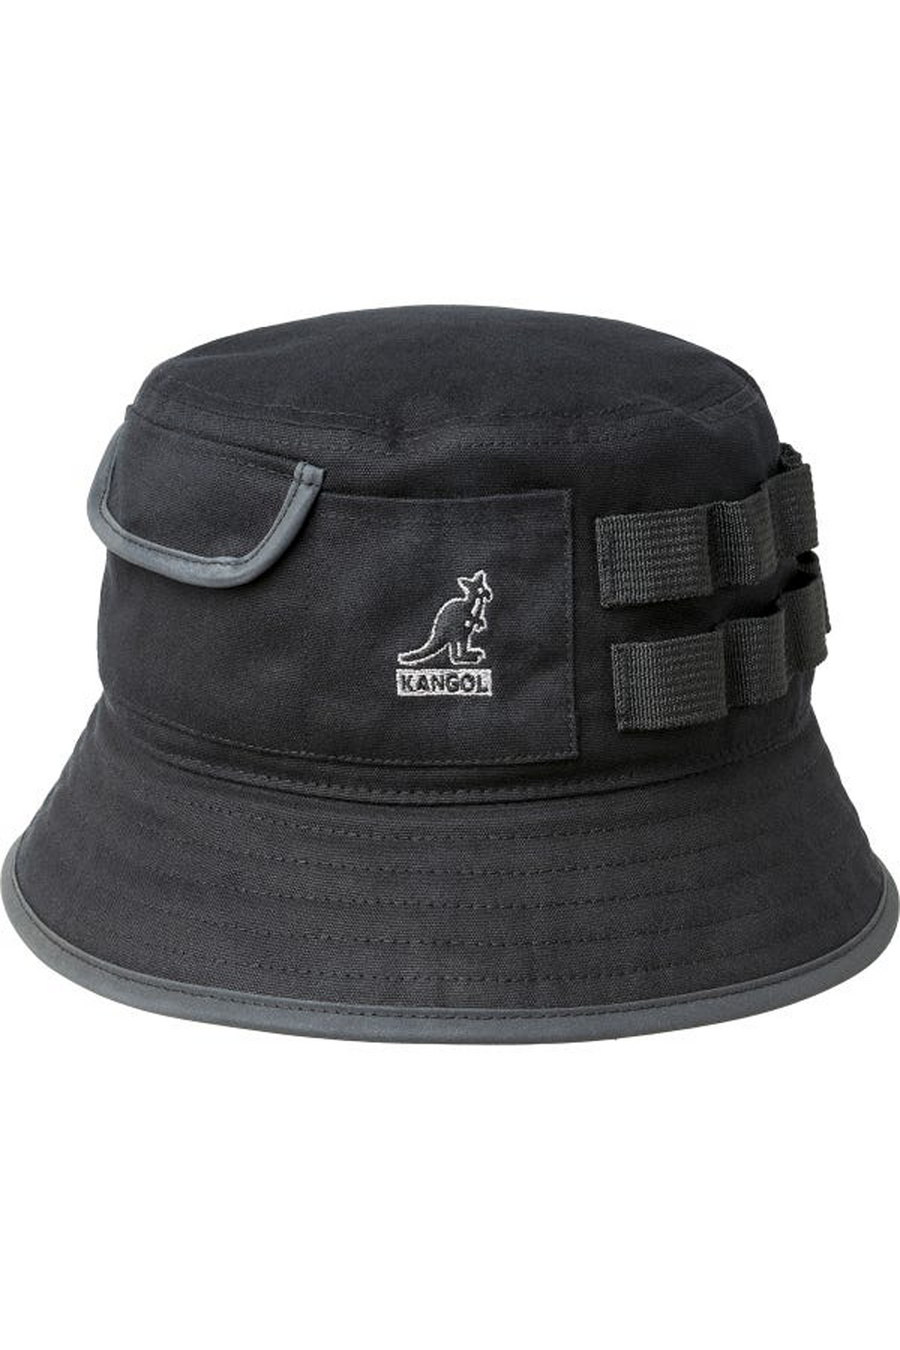 Buy the Kangol Waxed Utility Bucket Hat in Black at Intro. Spend £50 for free UK delivery. Official stockists. We ship worldwide.